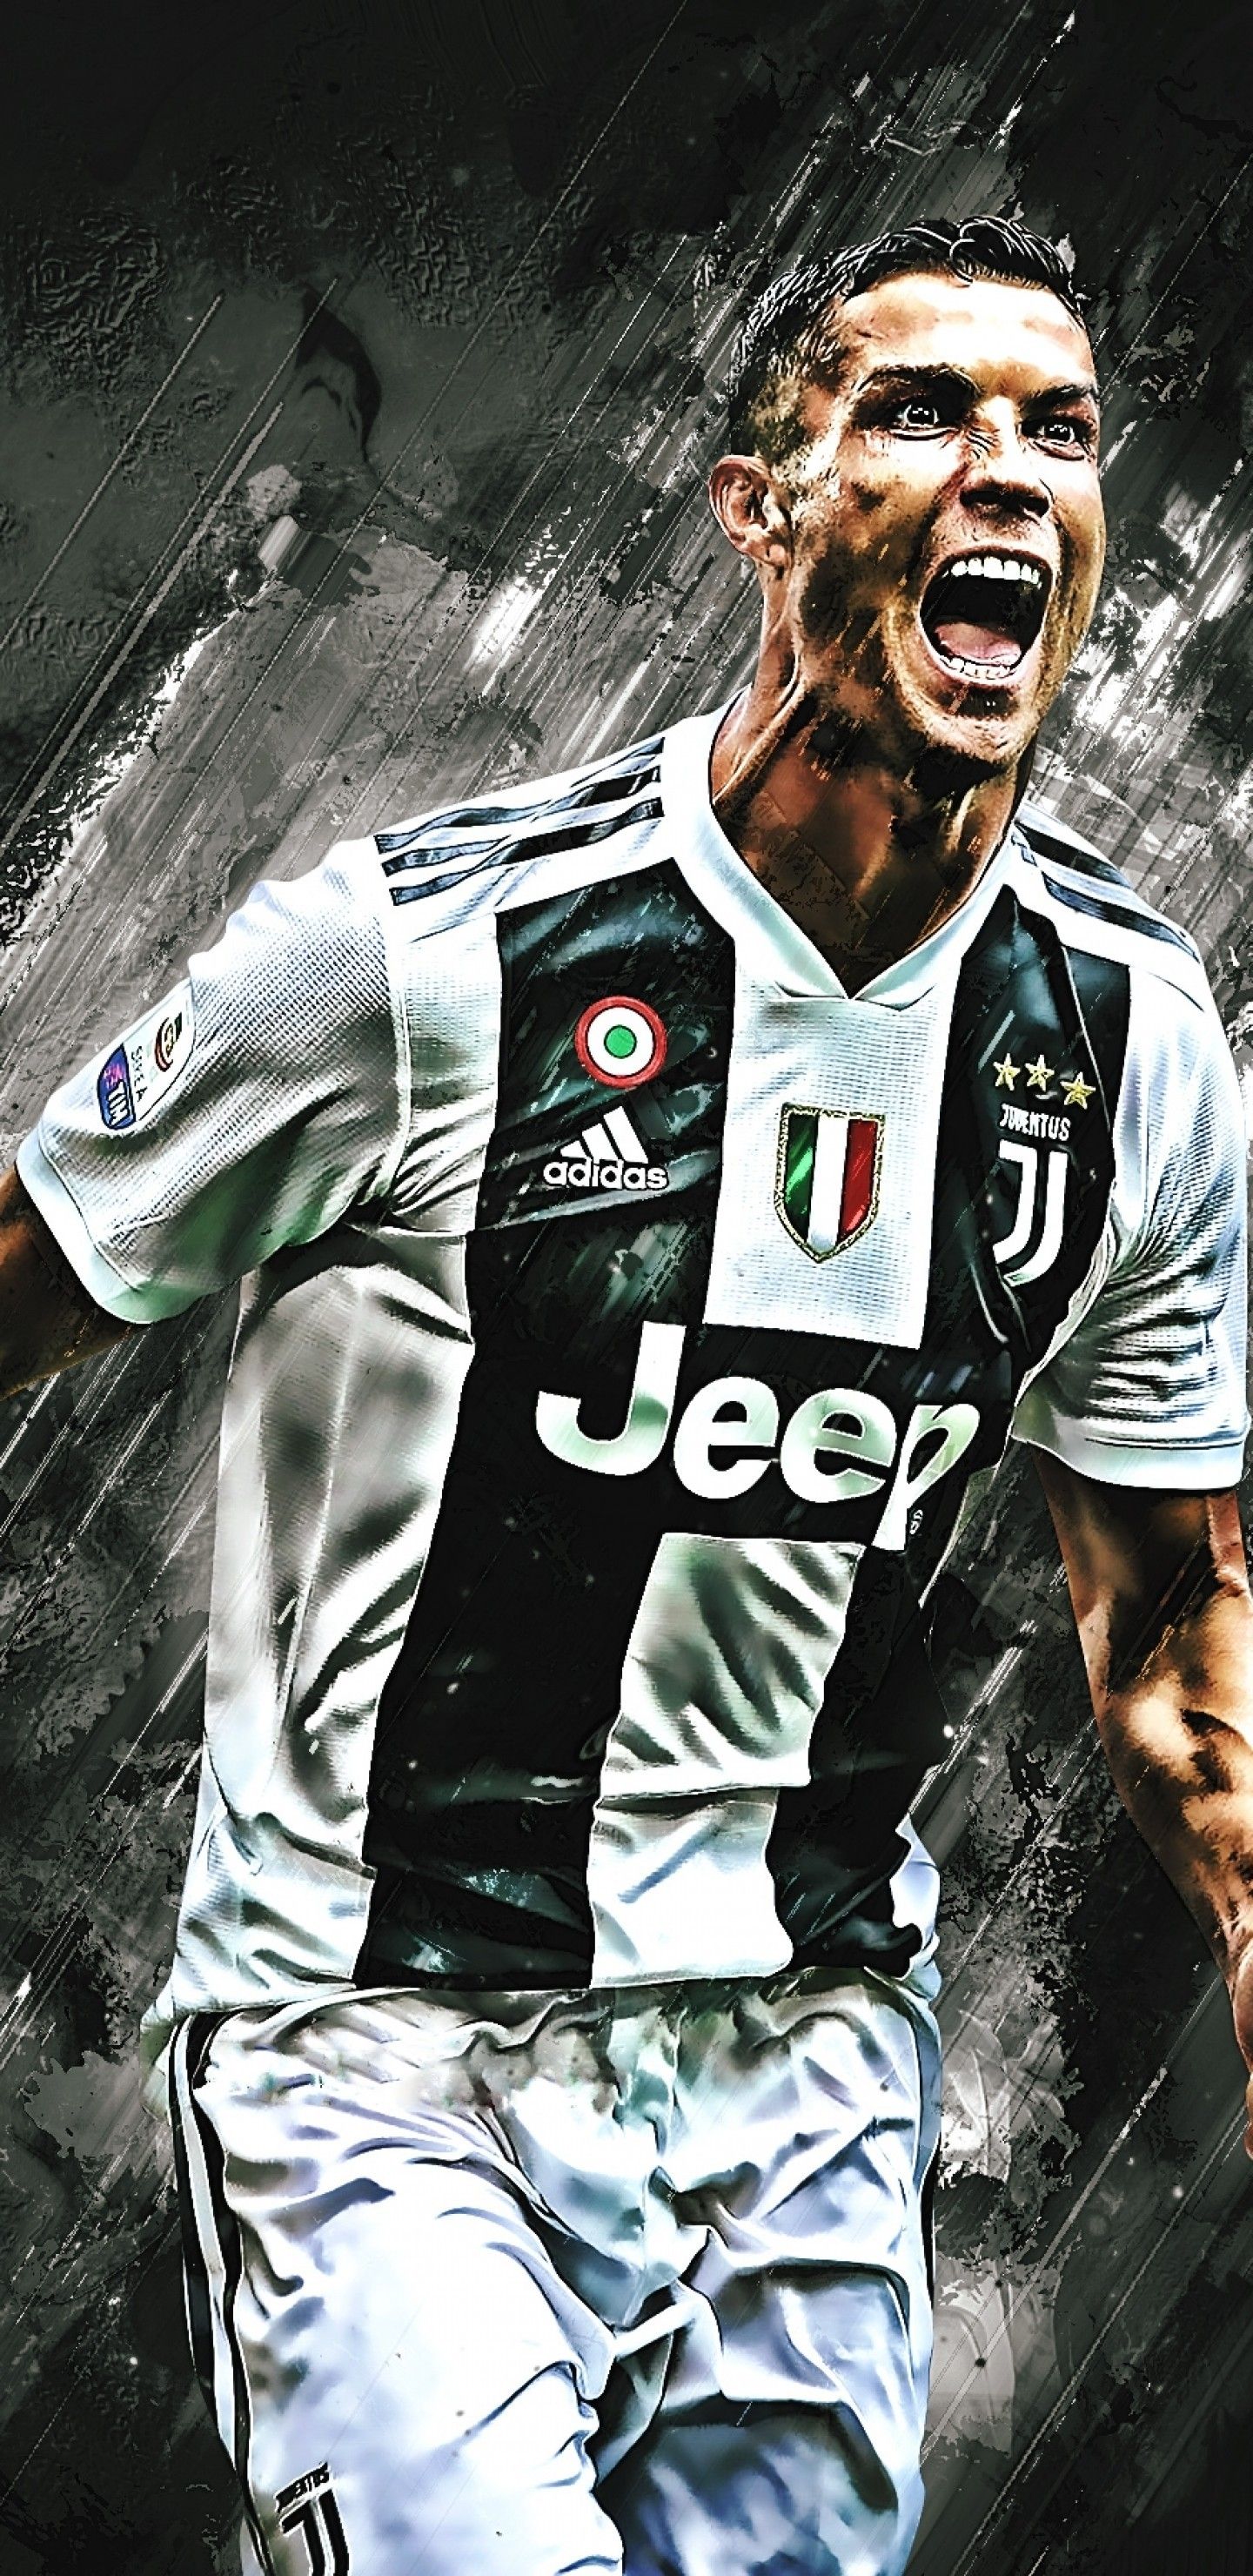 Download 1440x2960 Cristiano Ronaldo, Juventus Fc, Football Player Wallpaper for Samsung Galaxy S Note S S8+, Google Pixel 3 XL